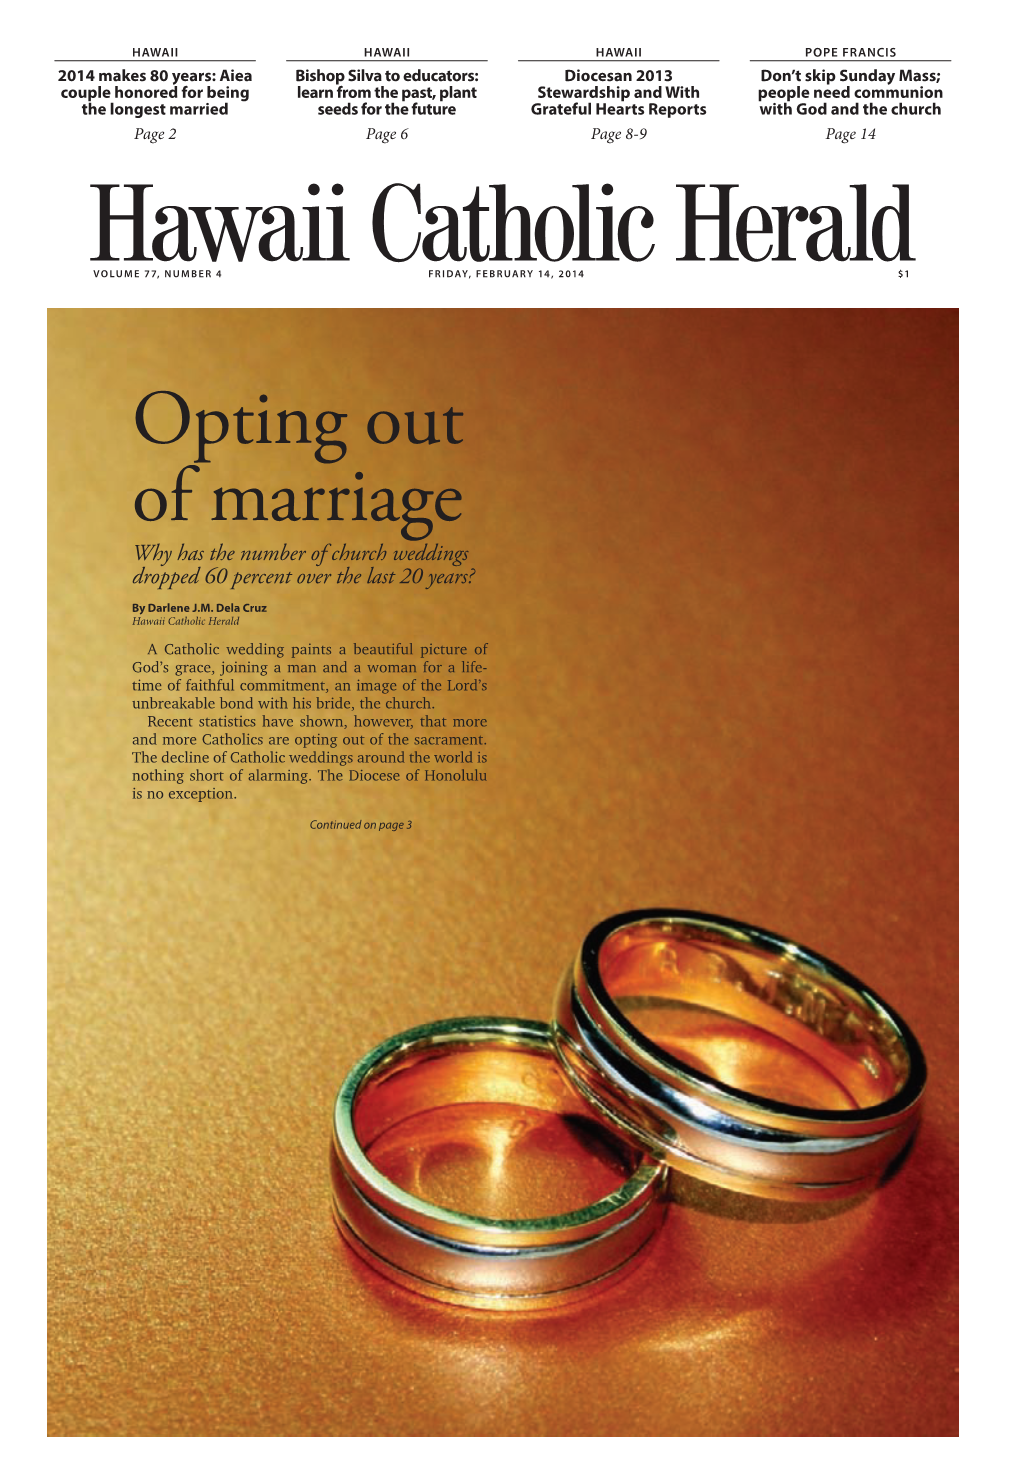 Opting out of Marriage Why Has the Number of Church Weddings Dropped 60 Percent Over the Last 20 Years? by Darlene J.M